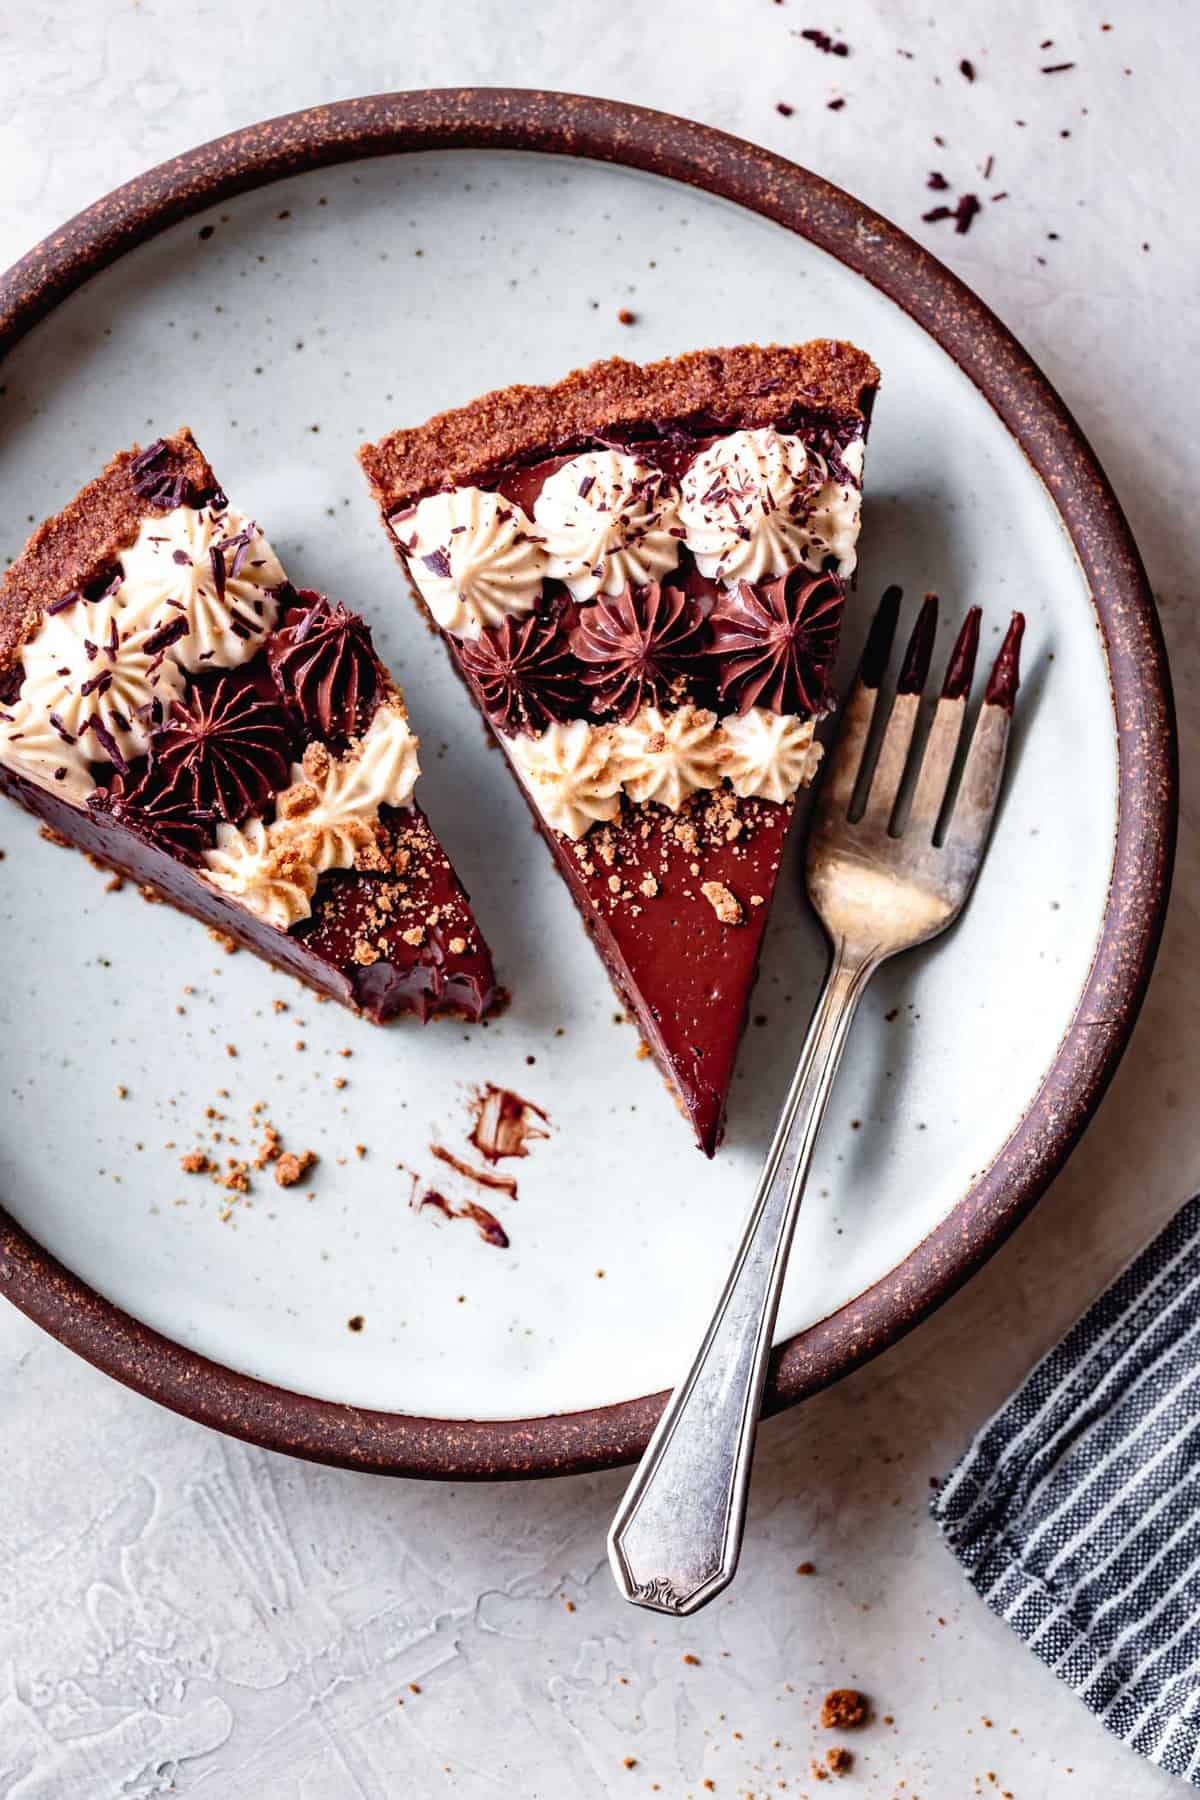 two slices of gluten-free vegan chocolate cream pie on a light blue plate with a fork